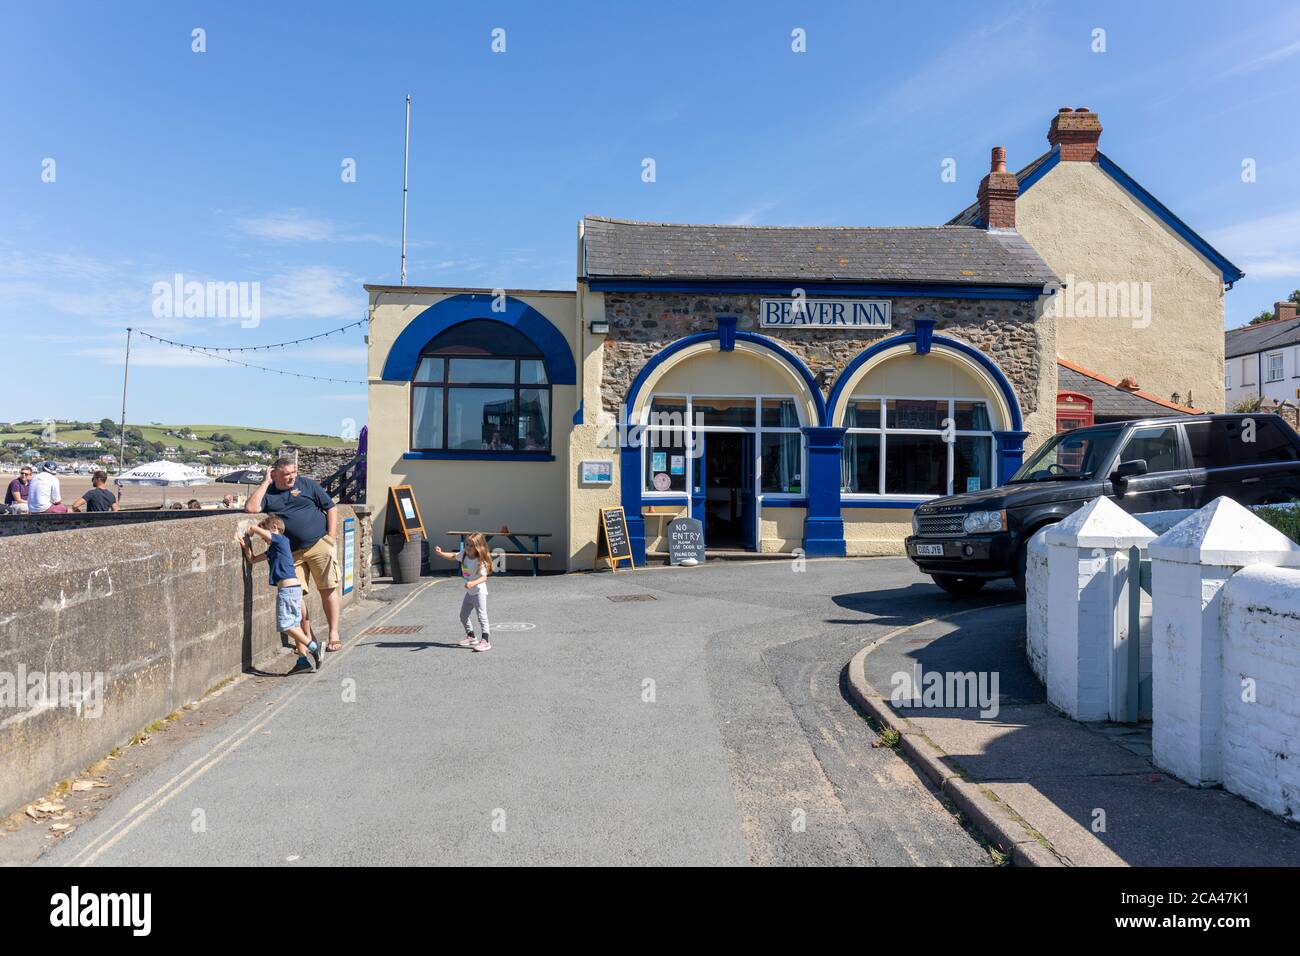 The Beaver Inn, Appledore, now open outside after the Coronavirus lockdown easing.  Photographed from public road. Stock Photo